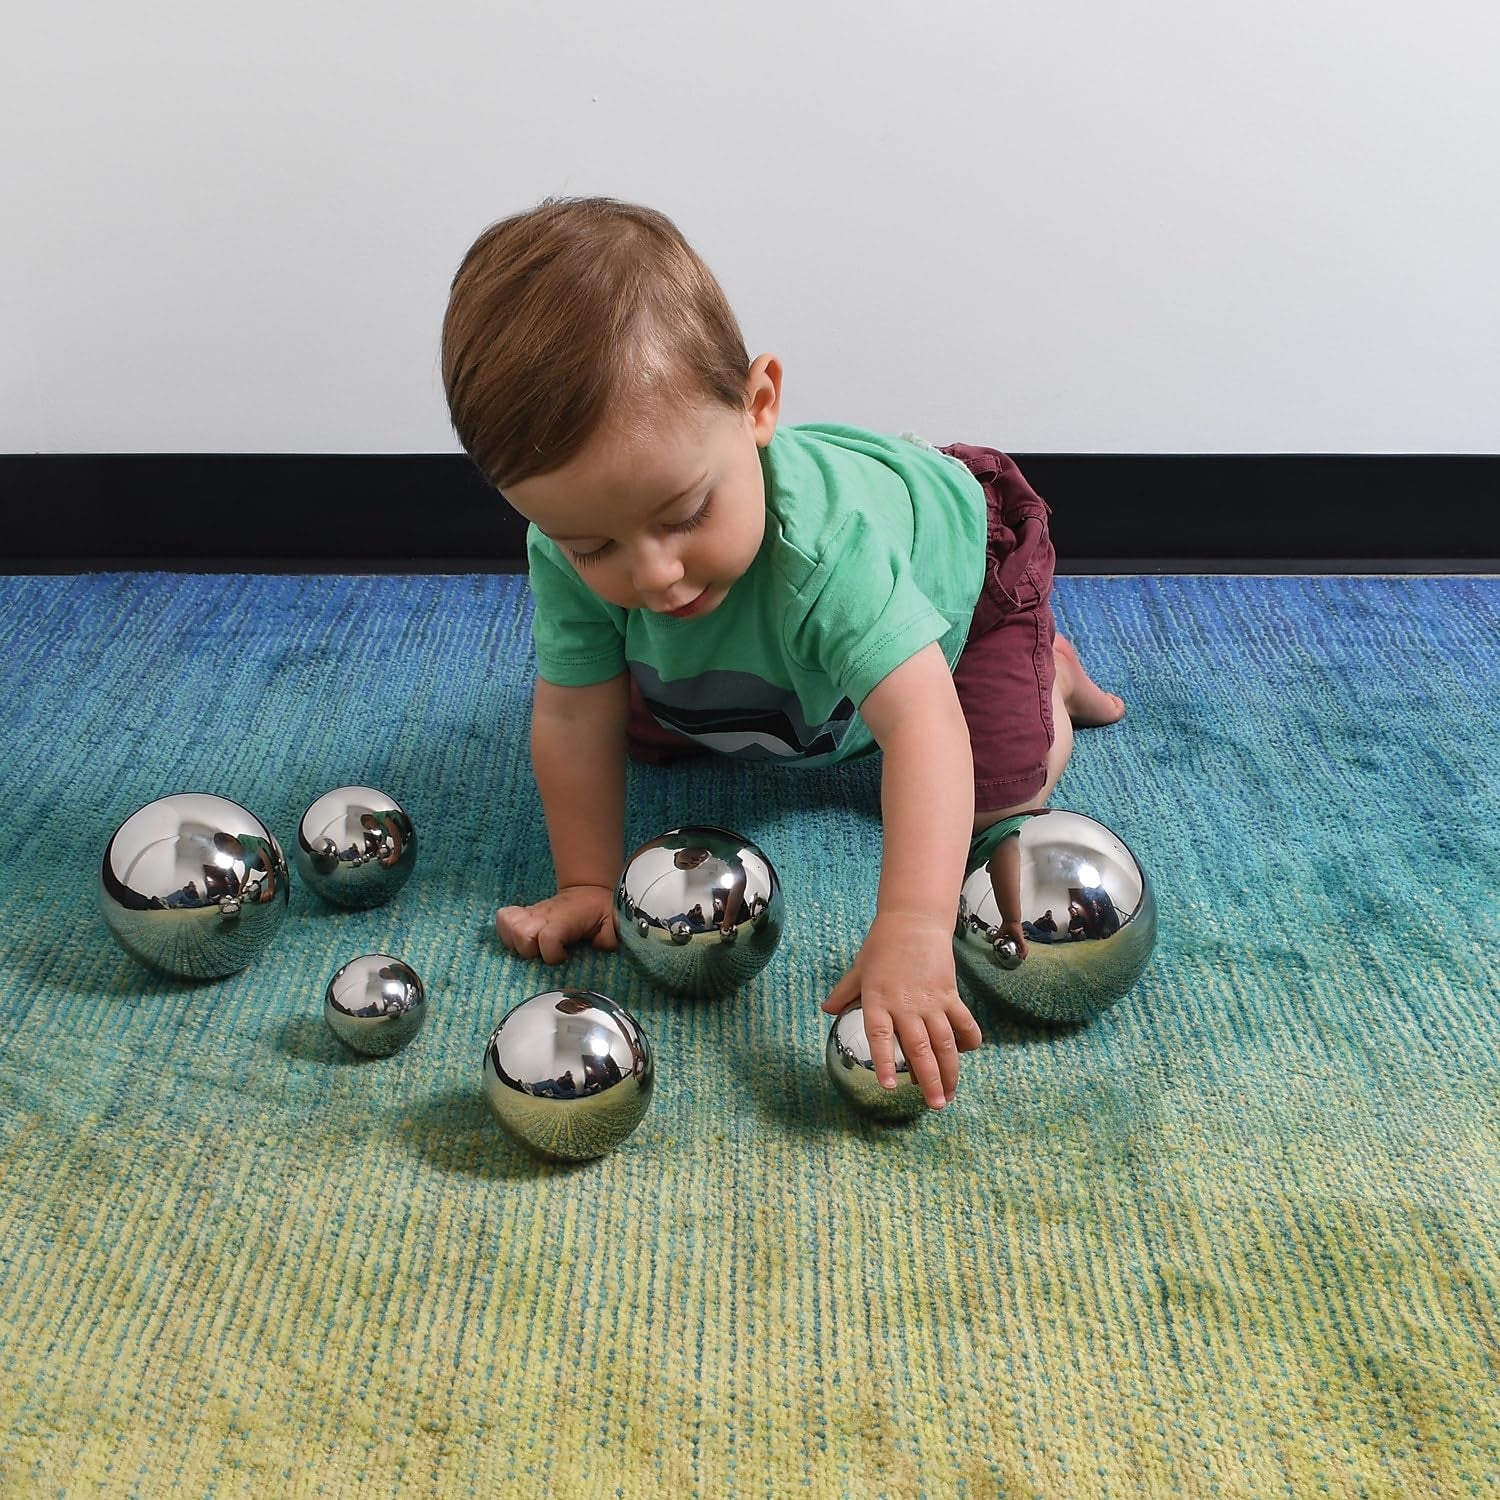 Sensory Reflective Sound Balls - Set of 7 - Multi-Sensory Toy for Babies, Toddlers - Resource for Special Educational Needs